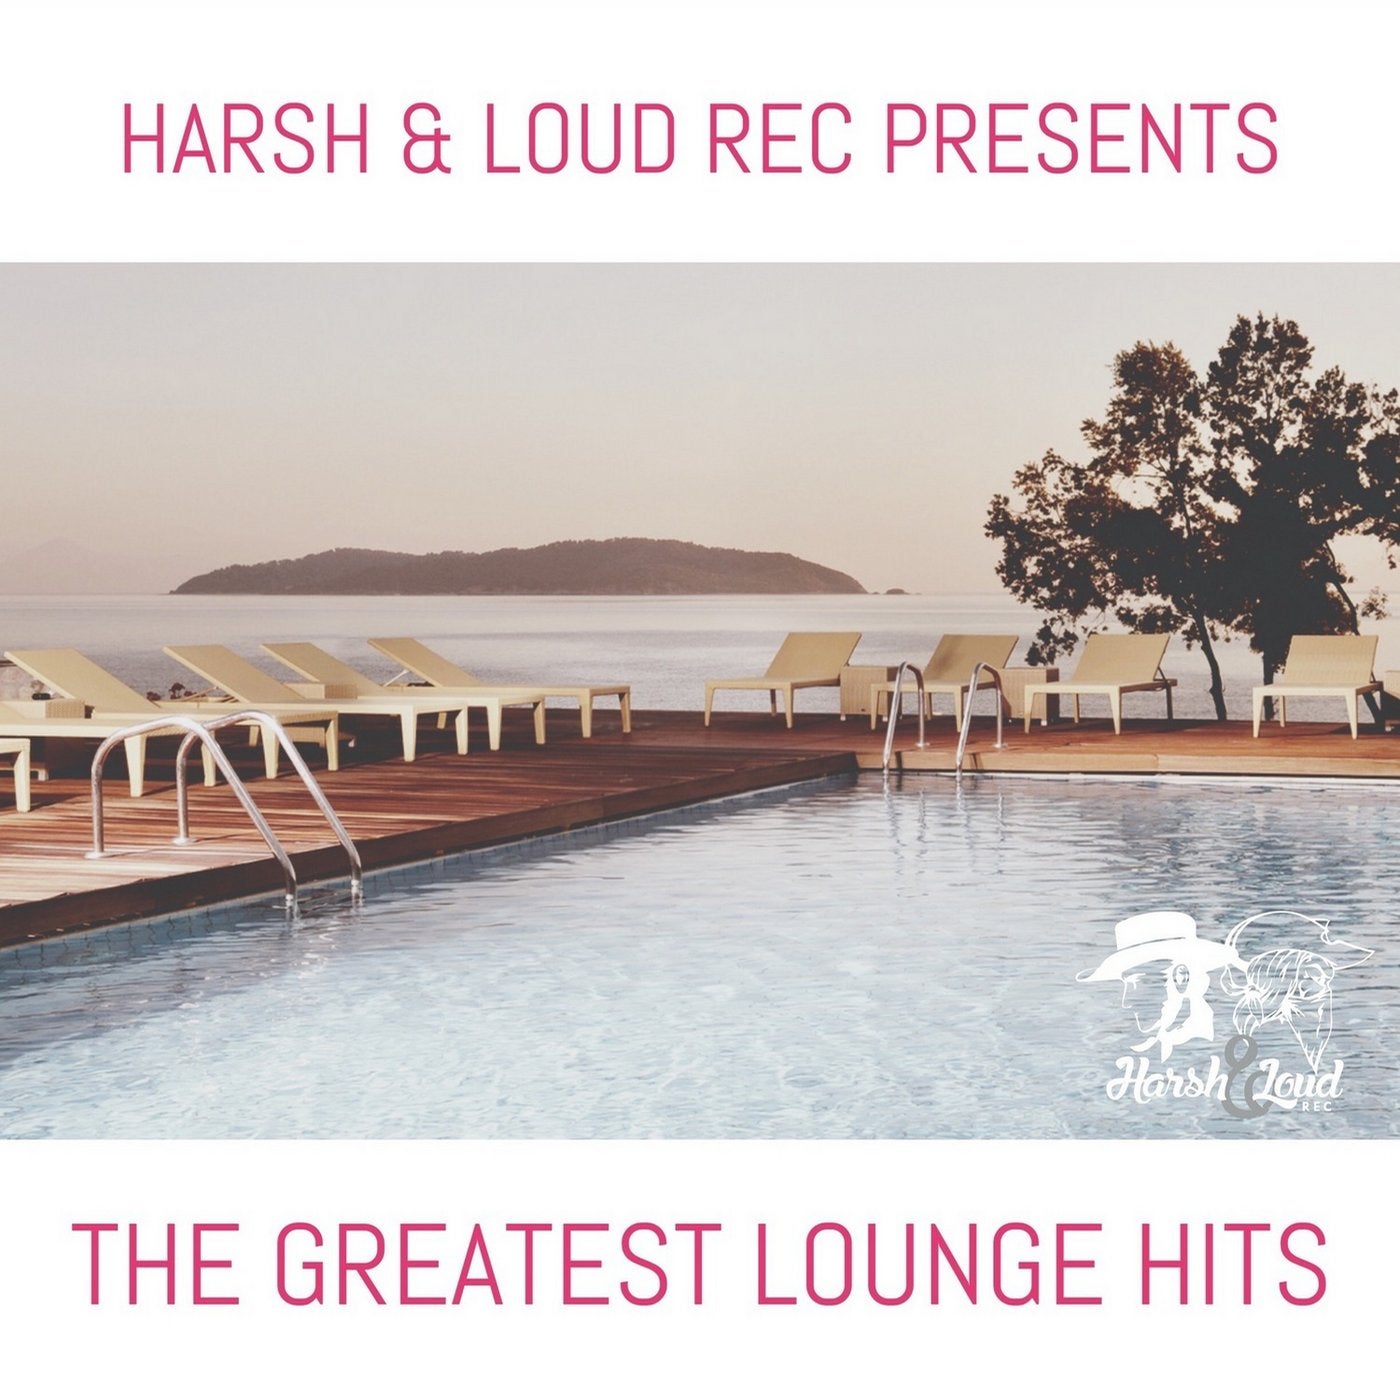 The Greatest Lounge Hits